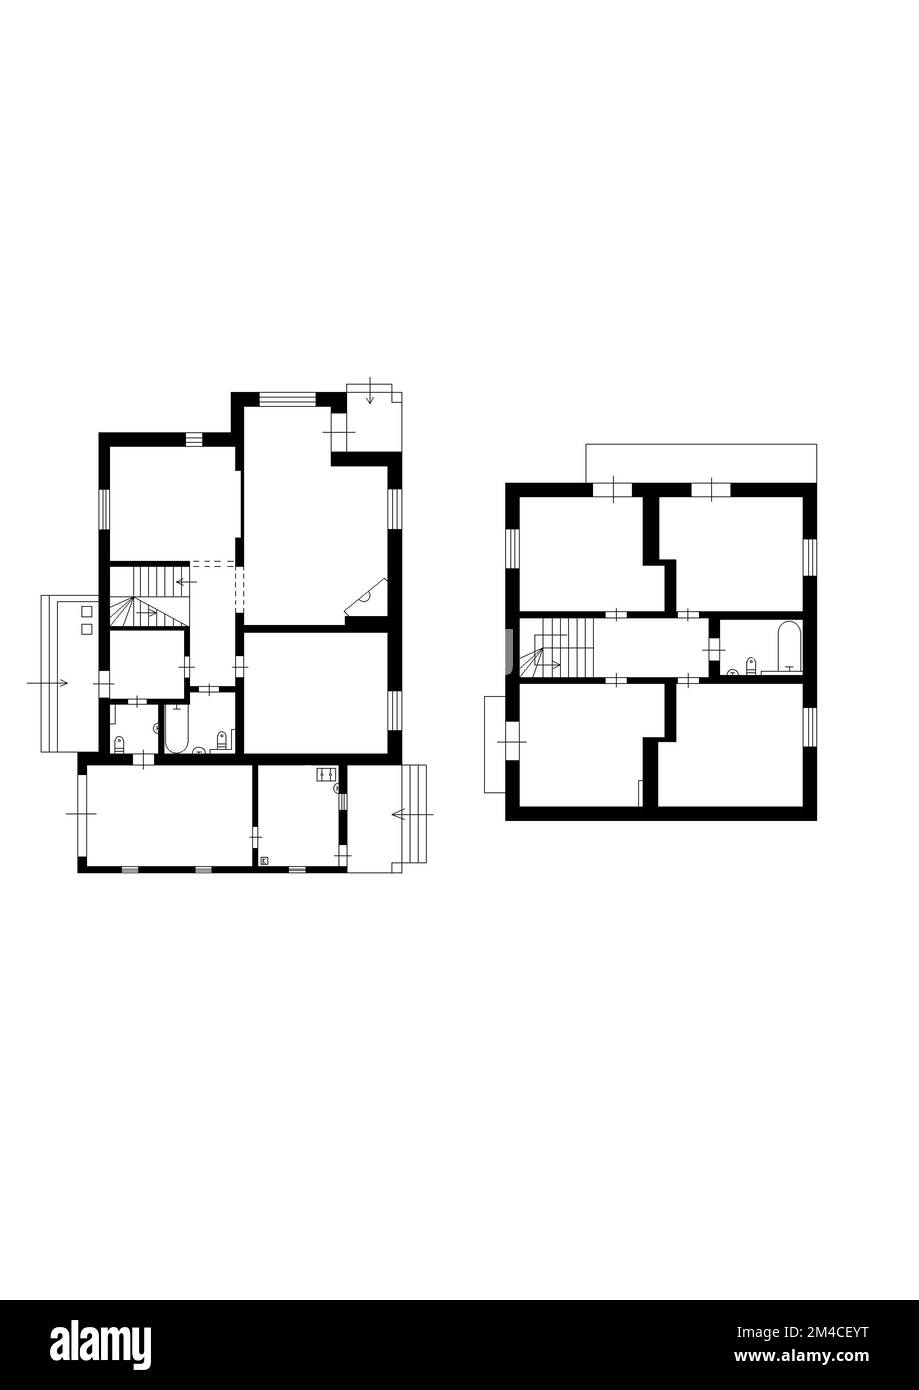 Drawing floorplan. 2d floor plan. Black&white floor plan. House with interior, floor plan, blueprints and colored walls on a white background. Stock Photo